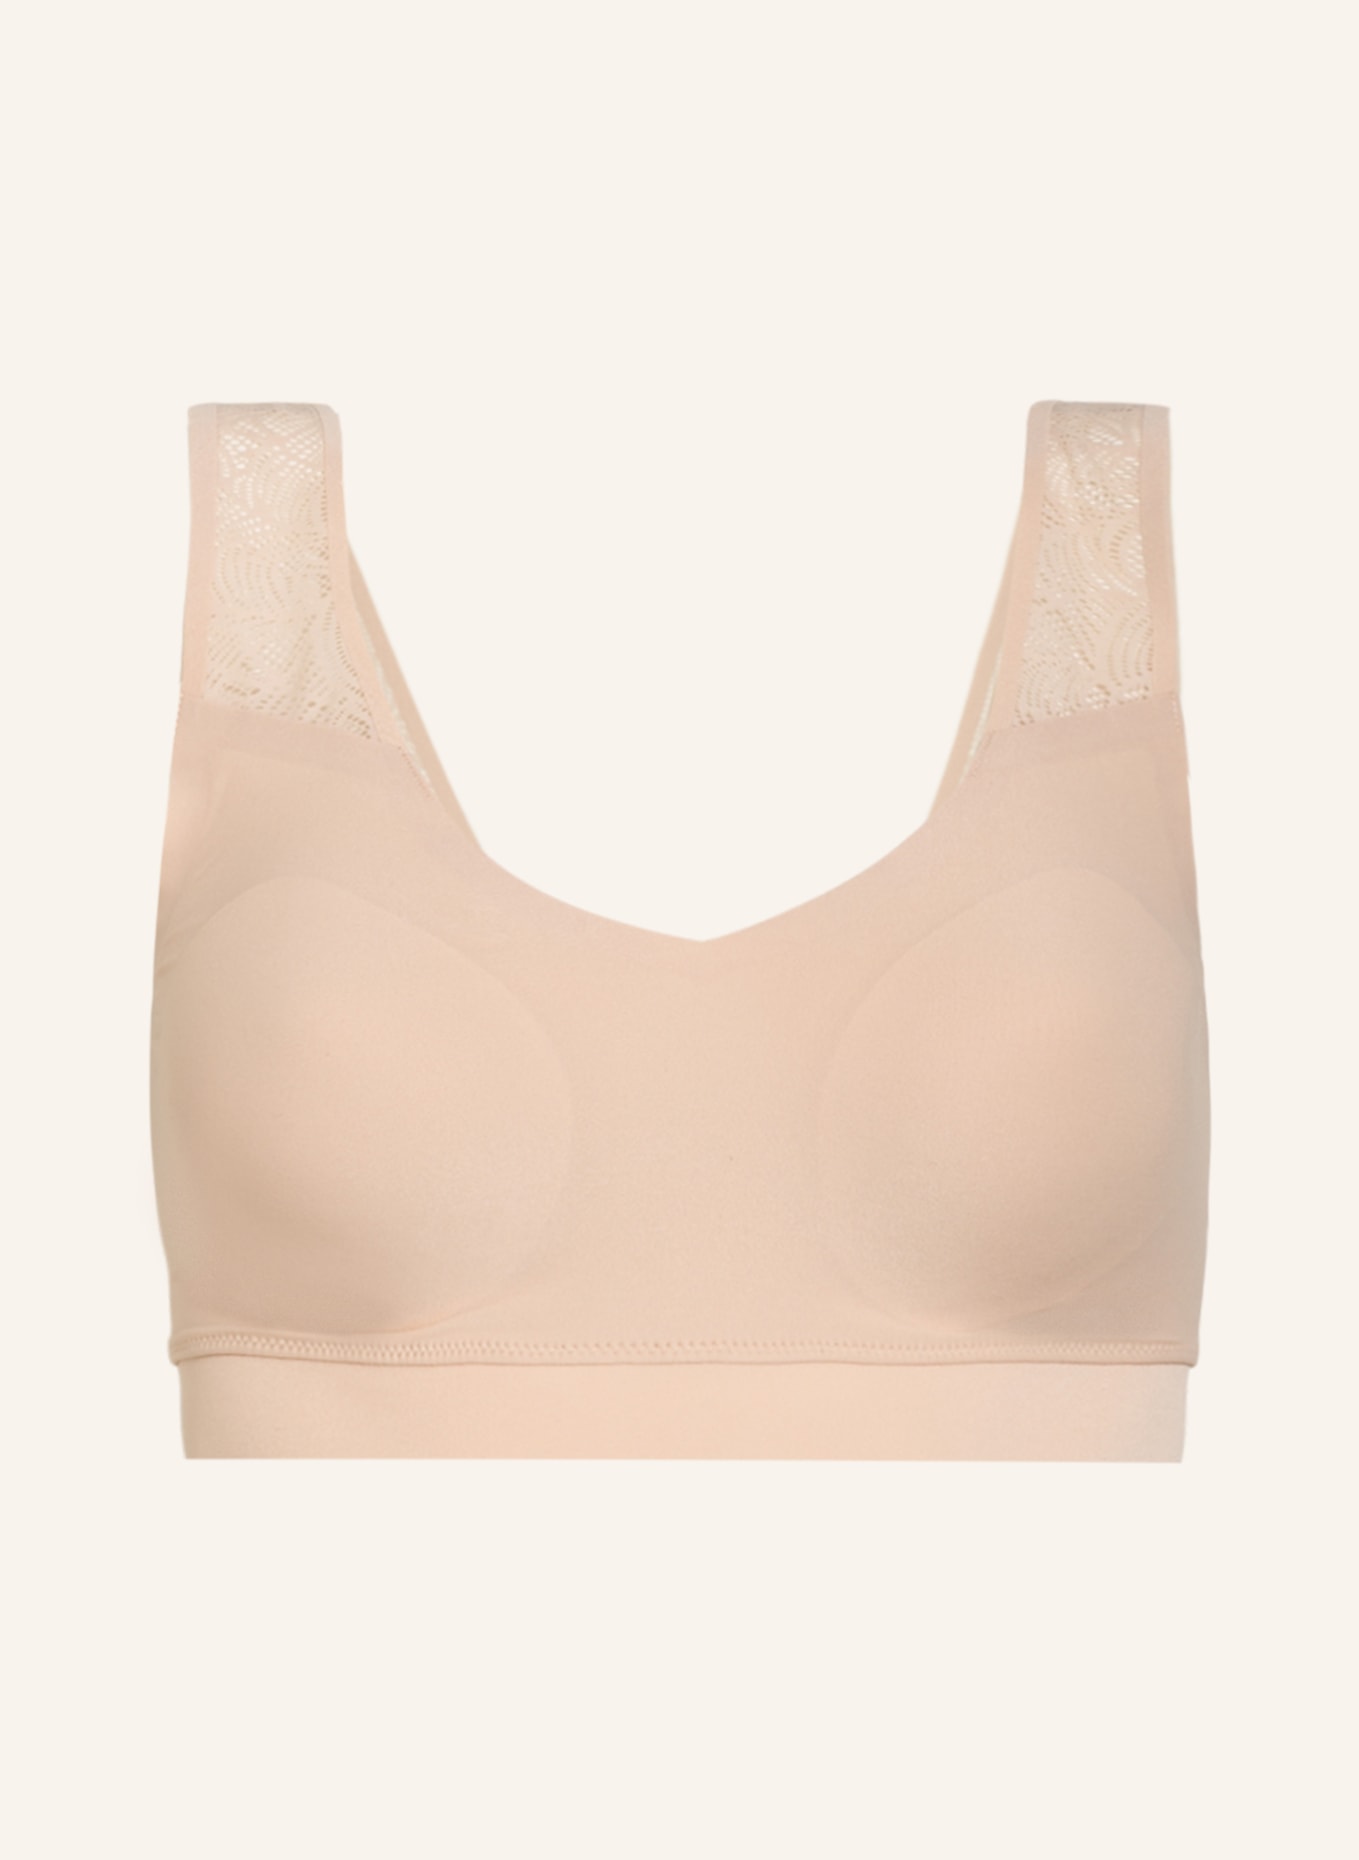 CHANTELLE Bustier SOFTSTRETCH , Farbe: NUDE (Bild 1)